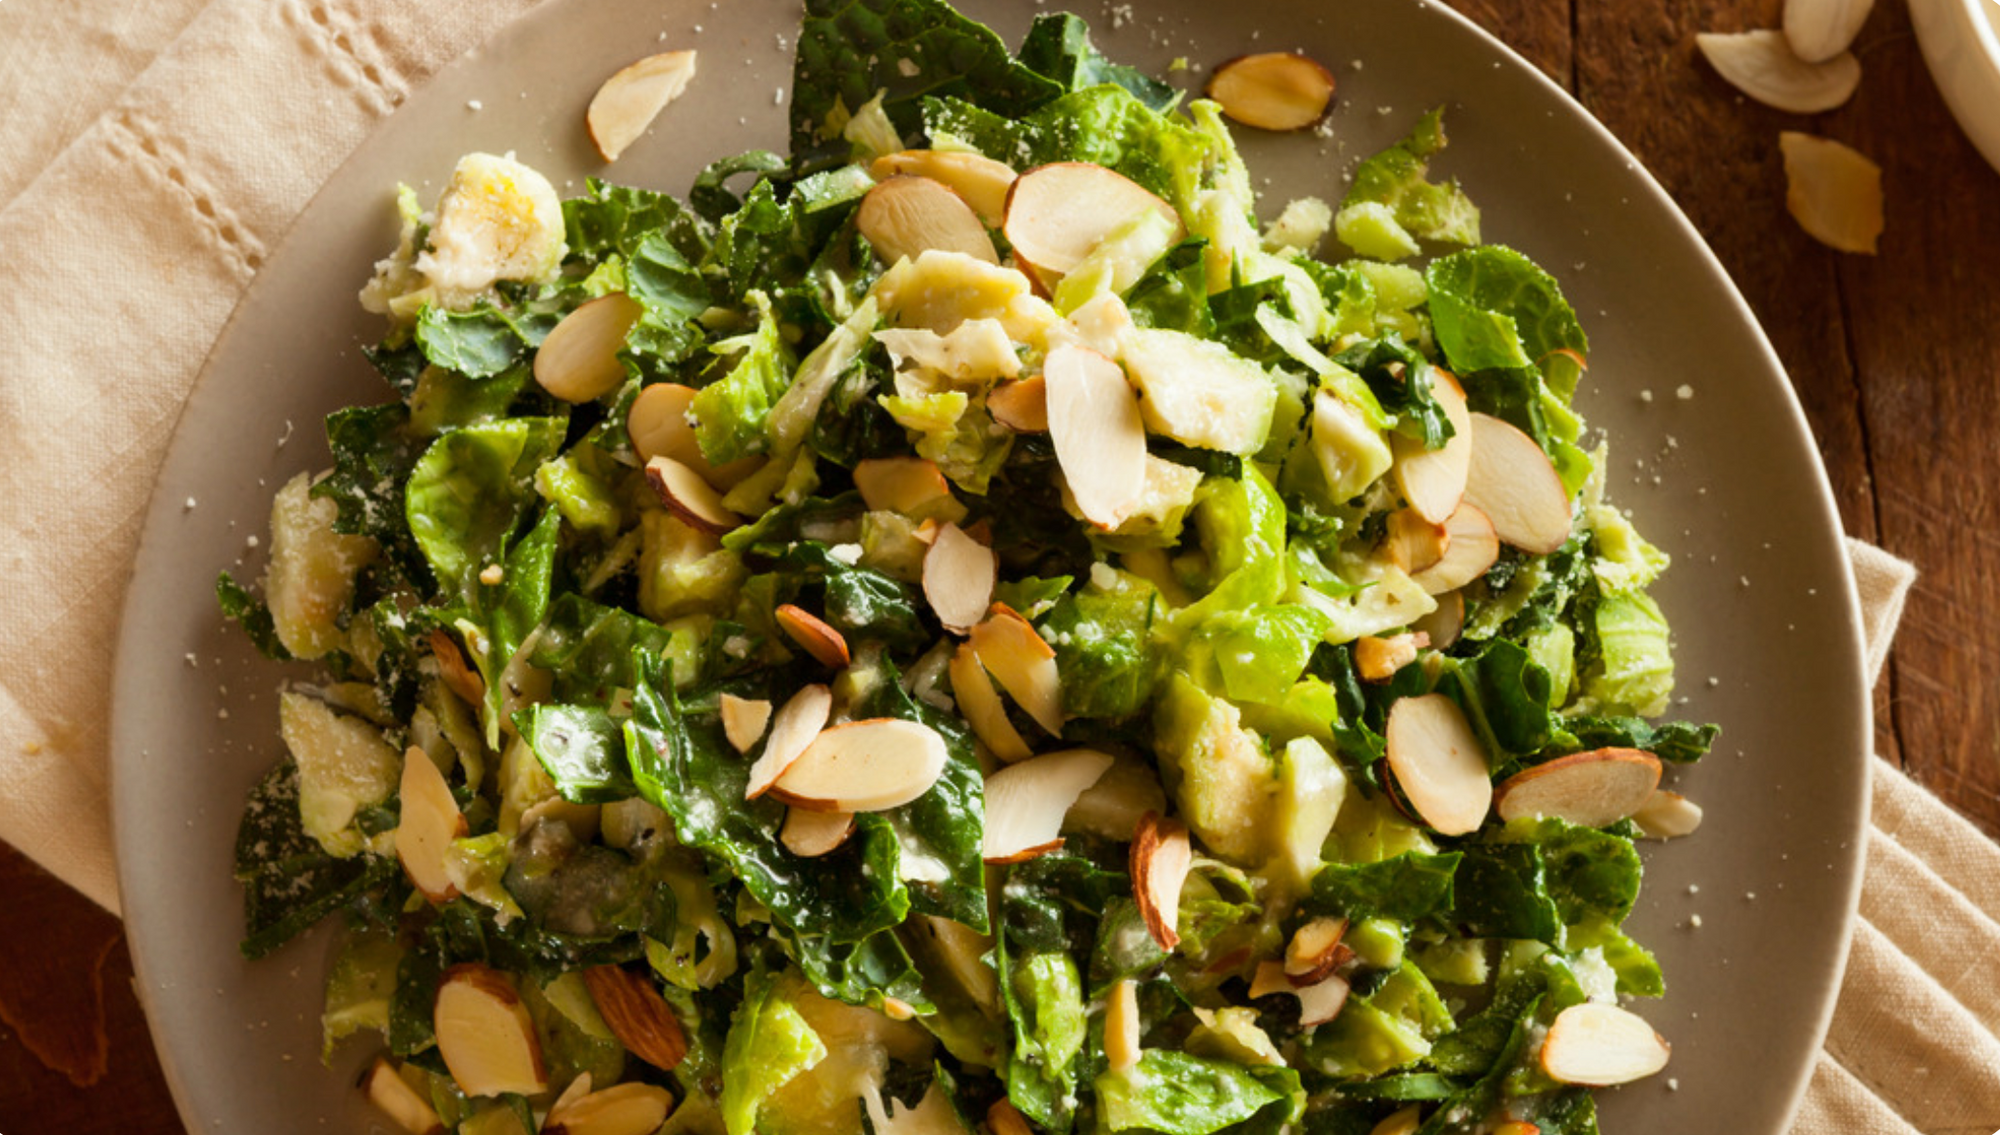 Almond-Crunch Brussels Sprouts and Mixed Greens Salad